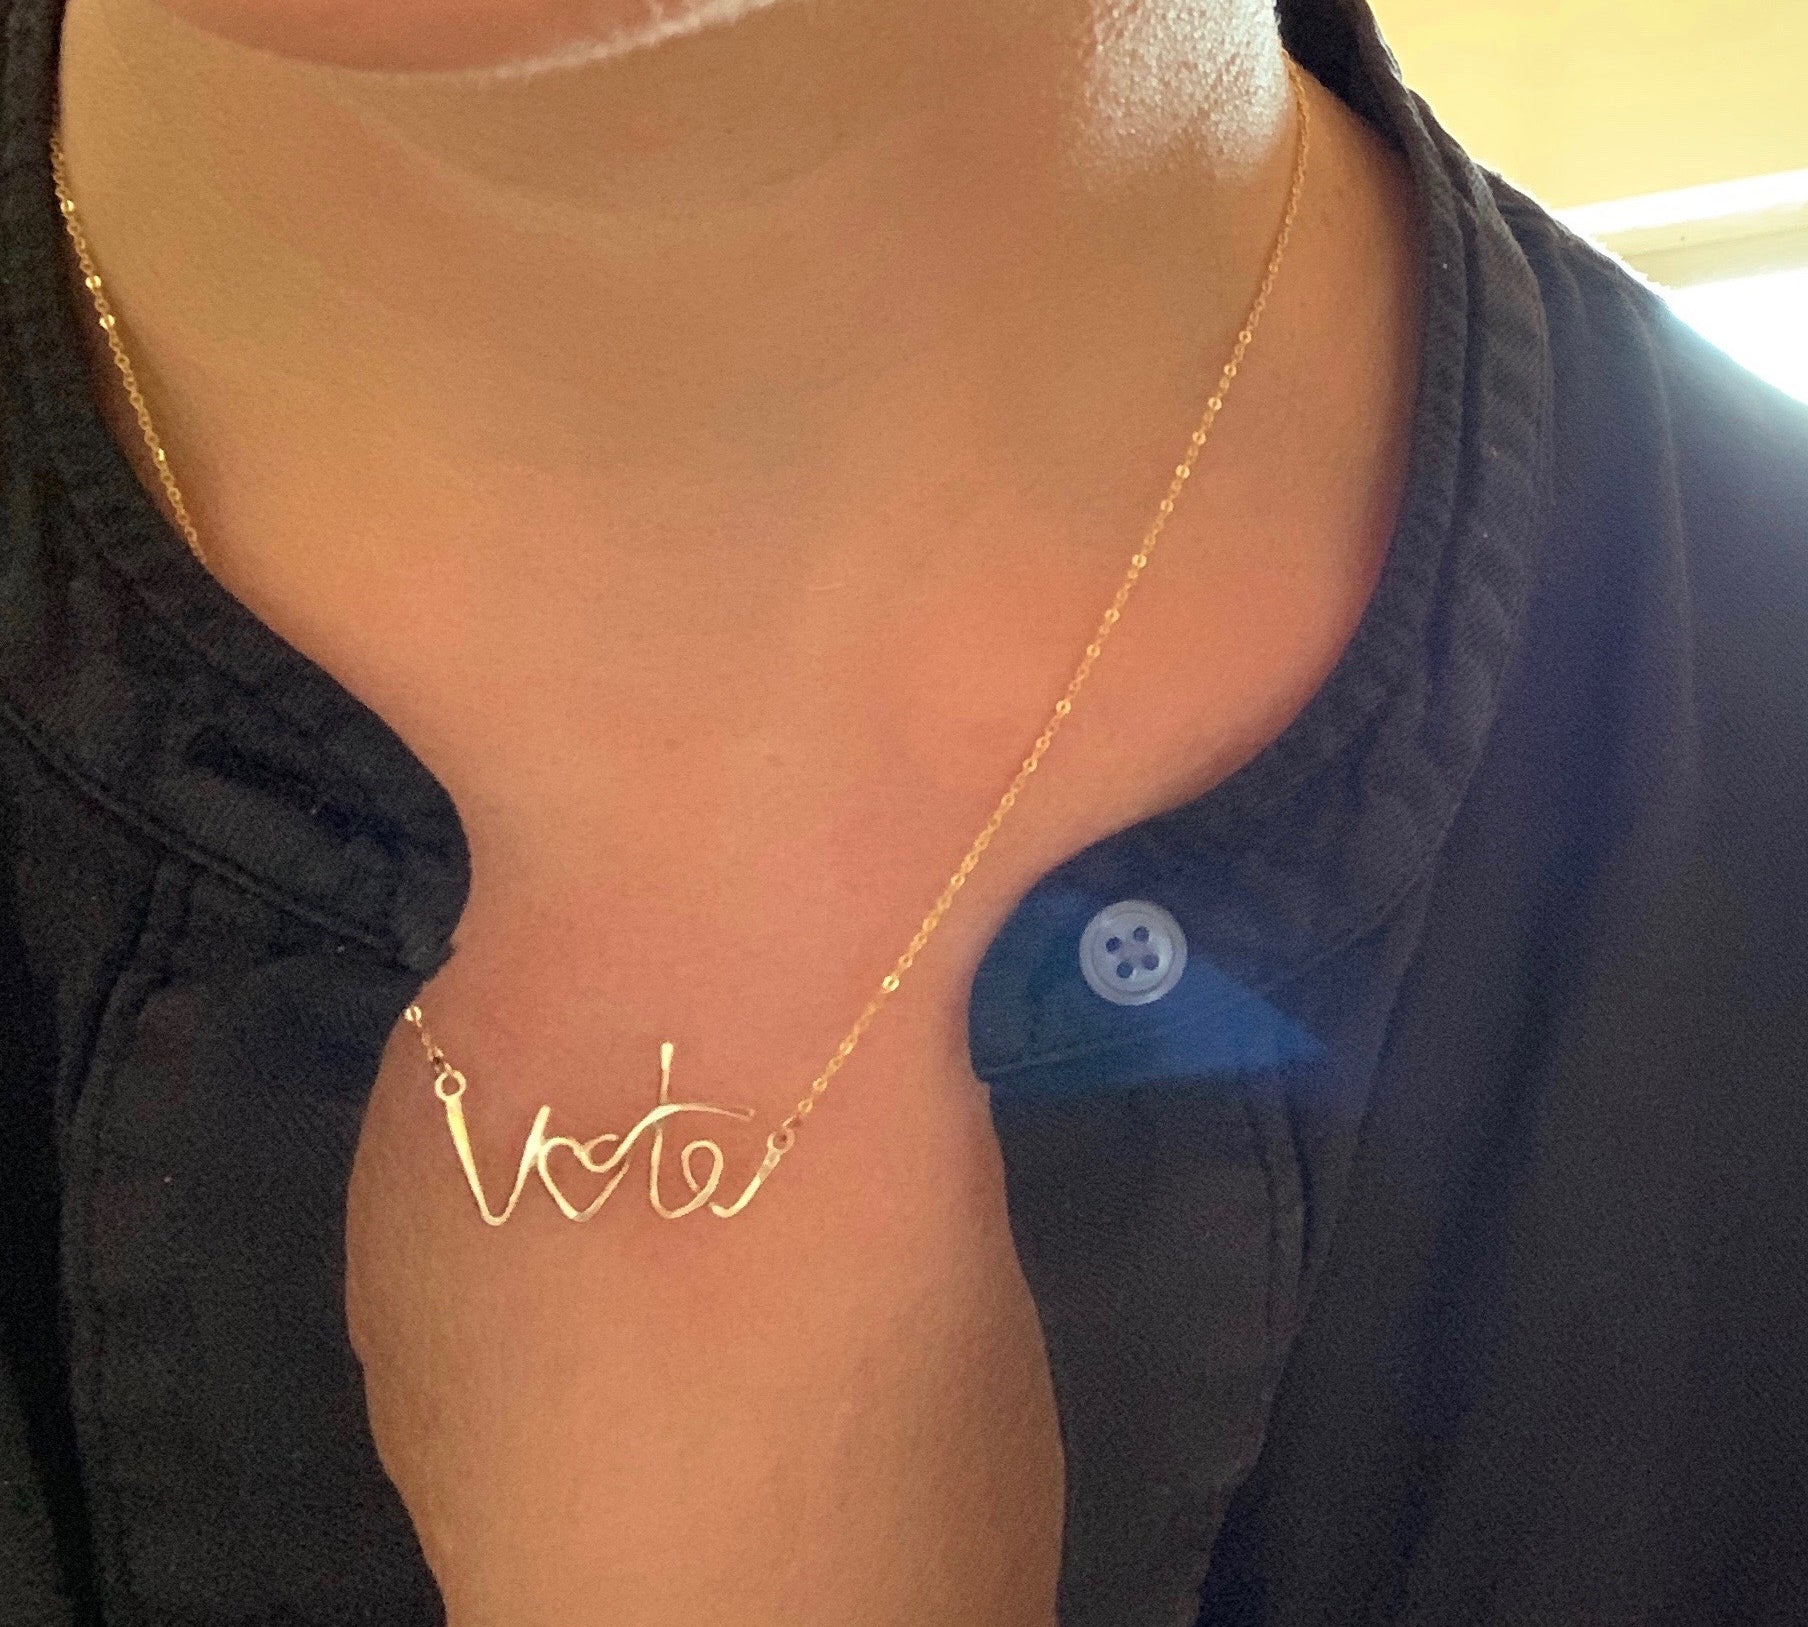 Vote Necklace, shown on model